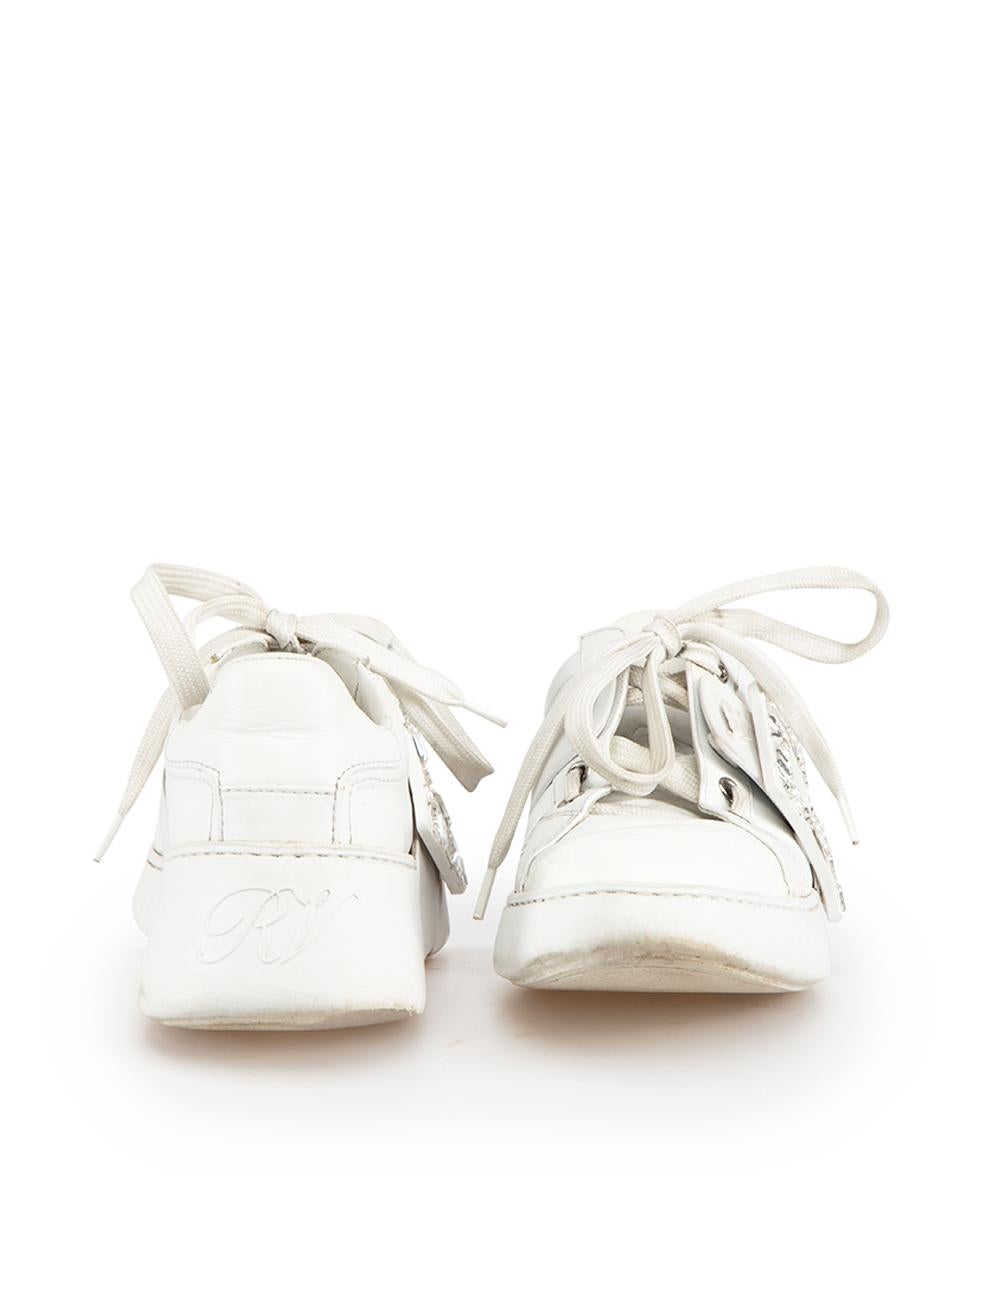 Roger Vivier White Leather Crystal Trainers Size IT 36 In Good Condition For Sale In London, GB